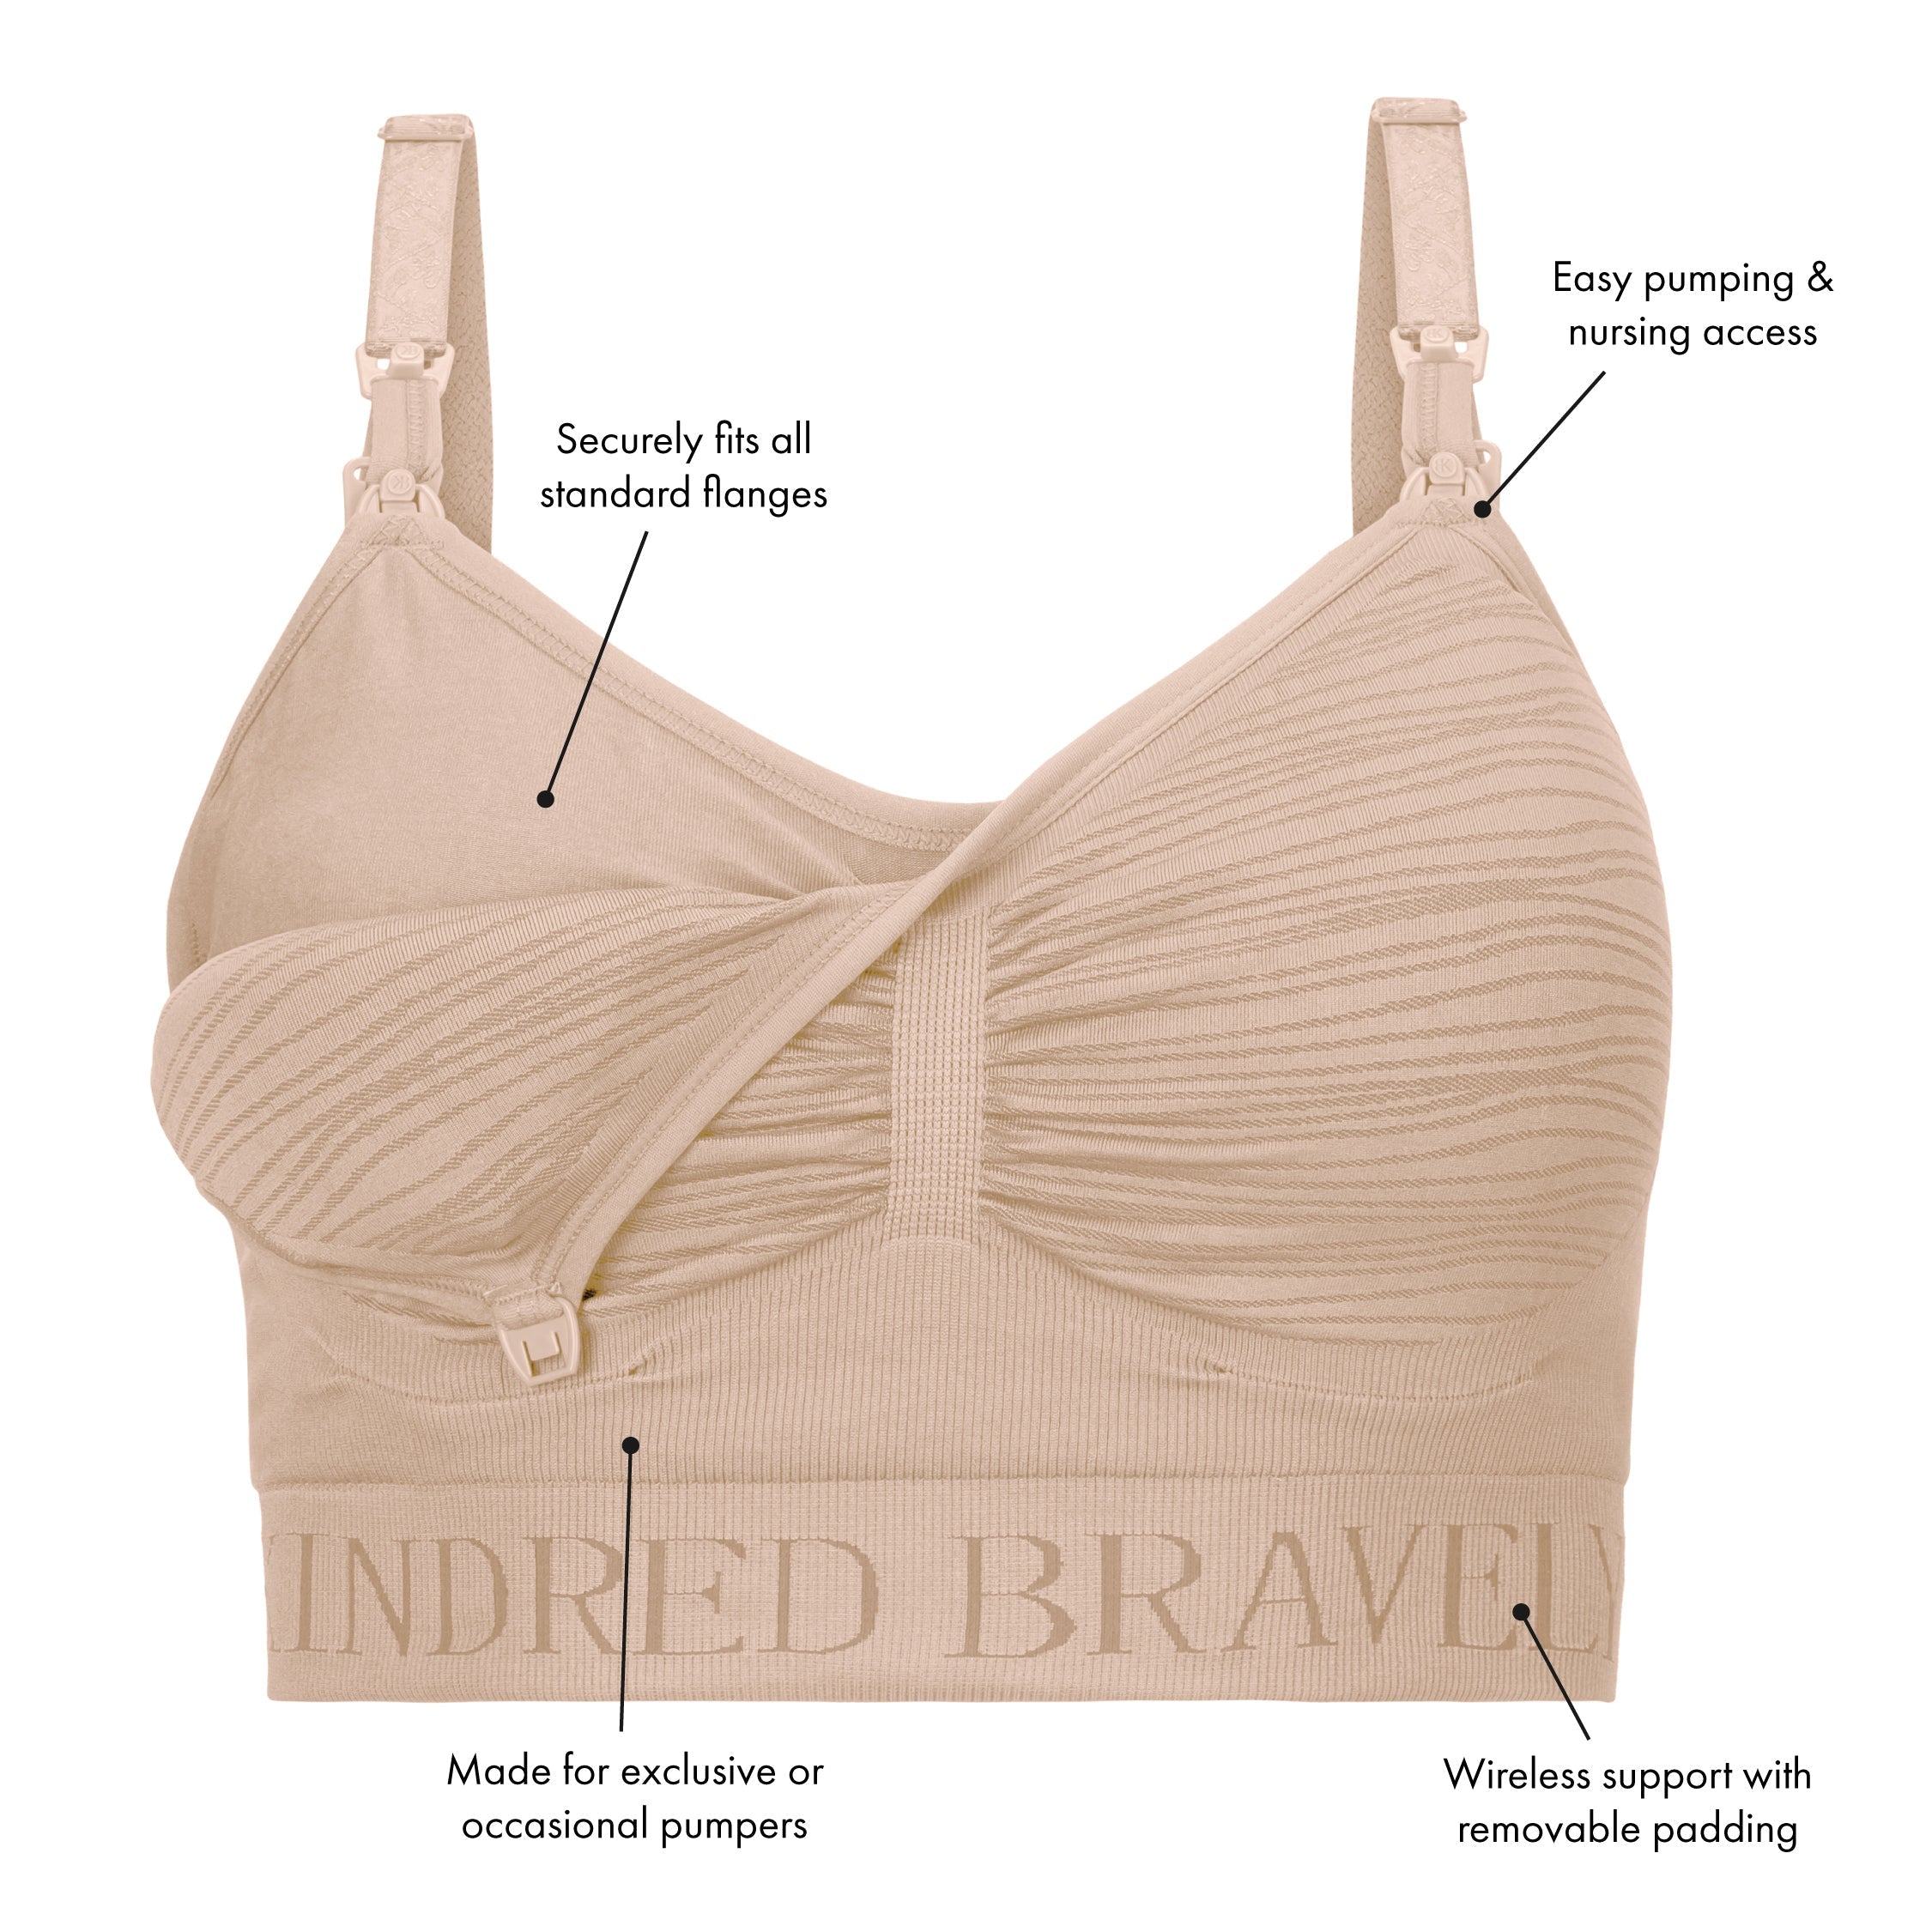 Kindred Bravely Pumping Bra Review (2024) - Exclusive Pumping